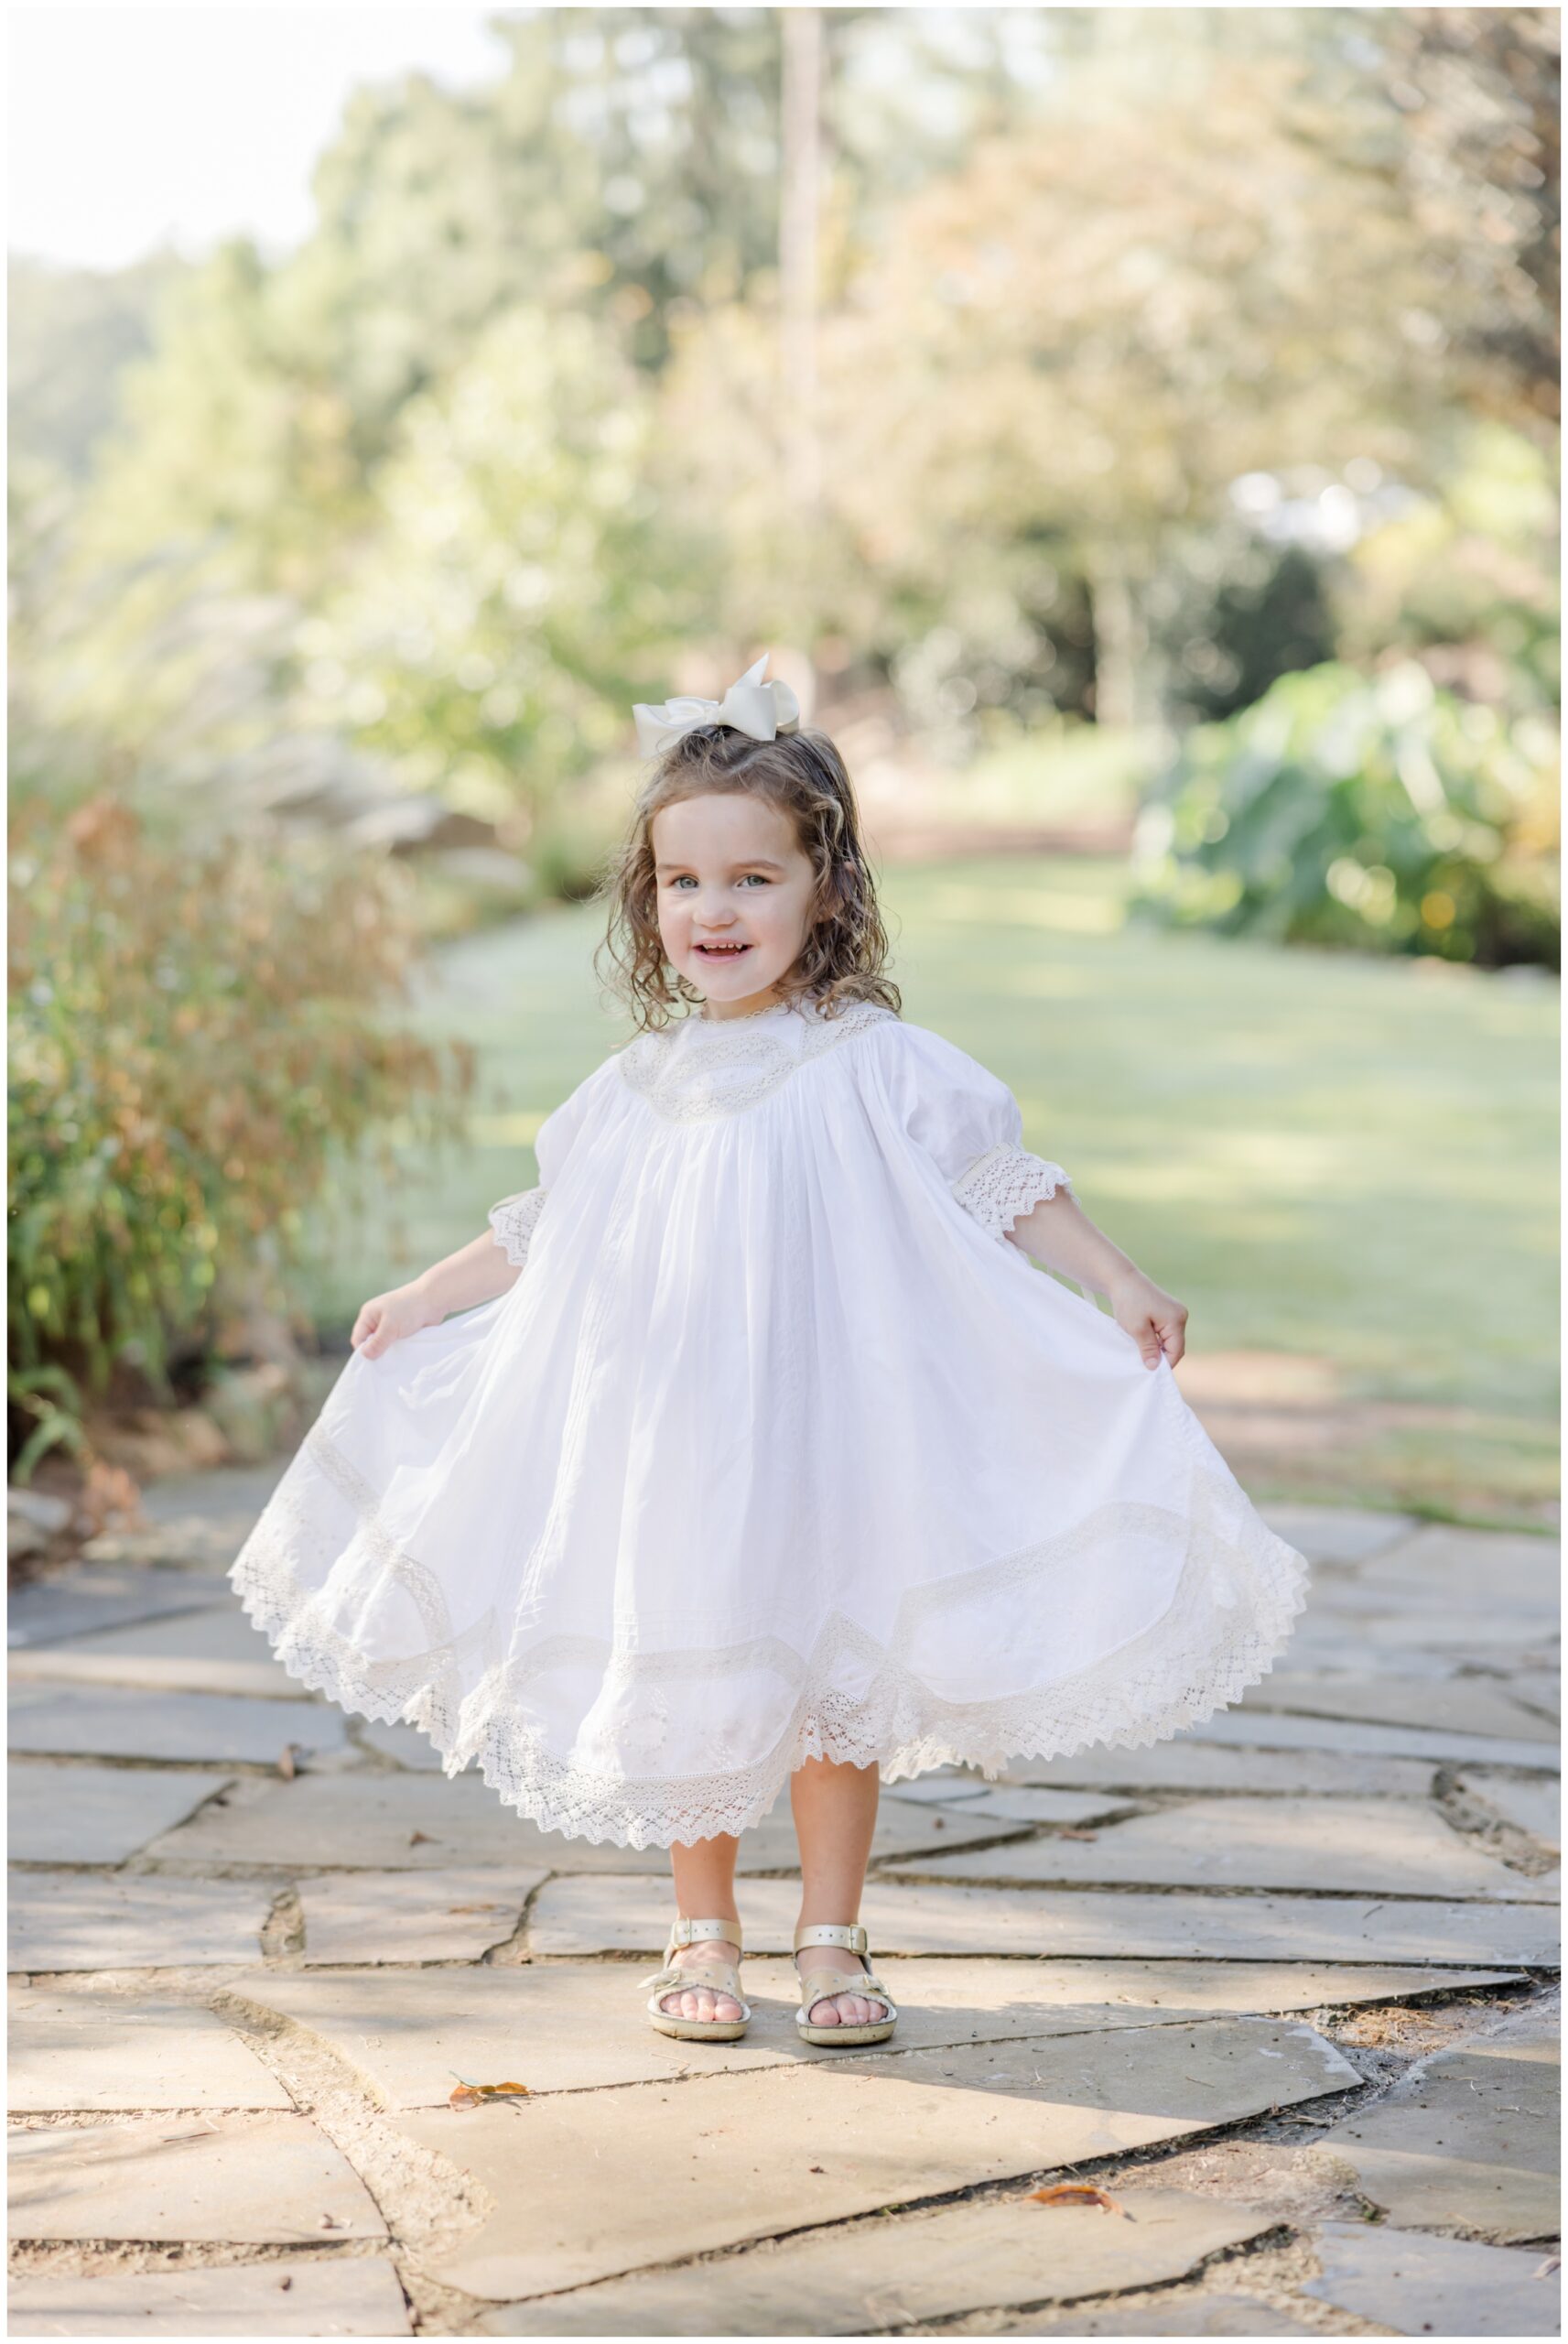 Two year old girl standing in a garden holding out a white heirloom dress for a photo taken by Greenville children's photographer Molly Hensley.